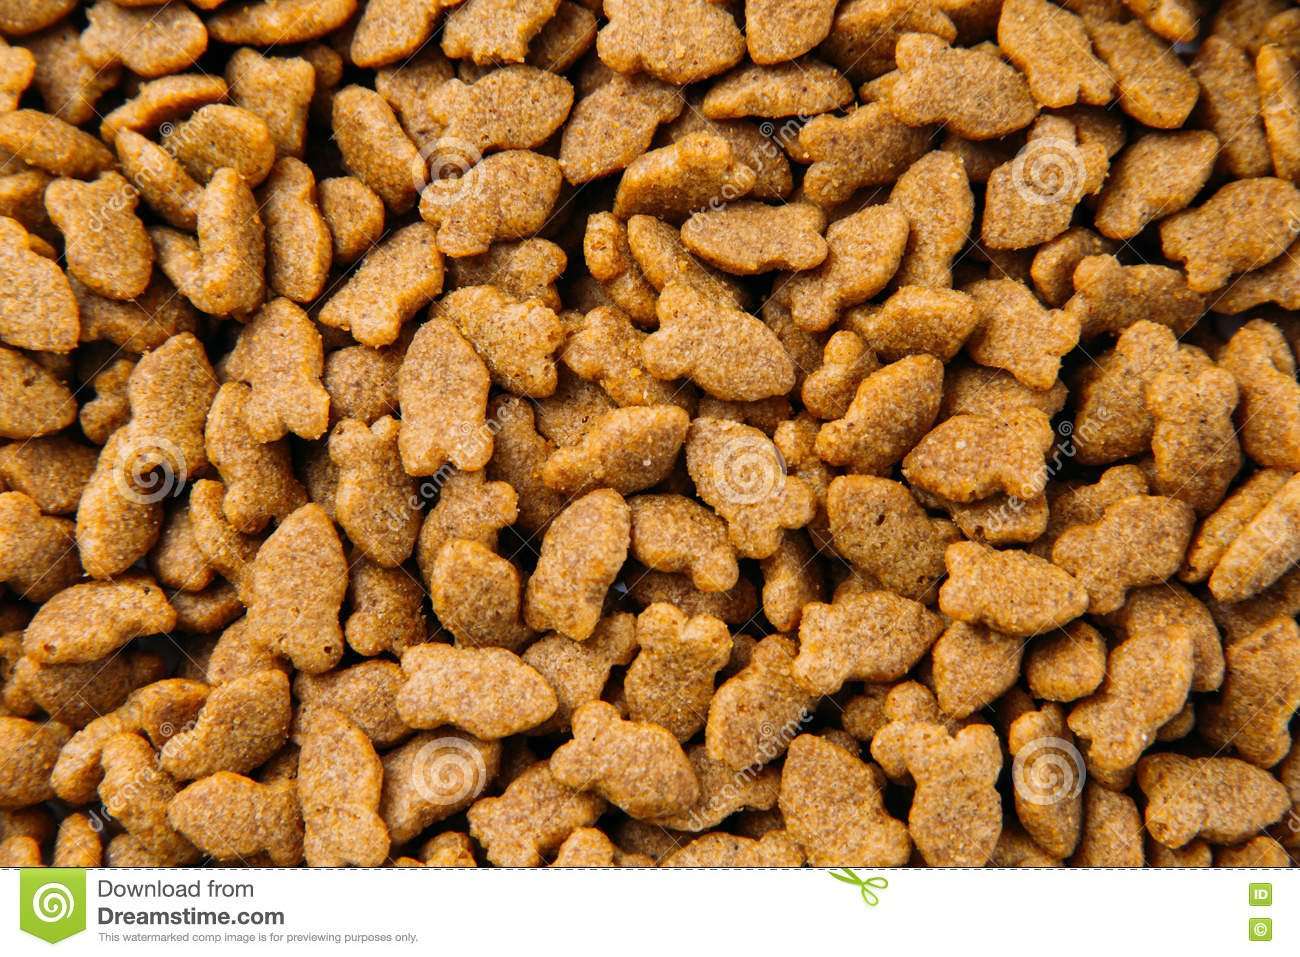 Dried cat food background stock photo. Image of food ...